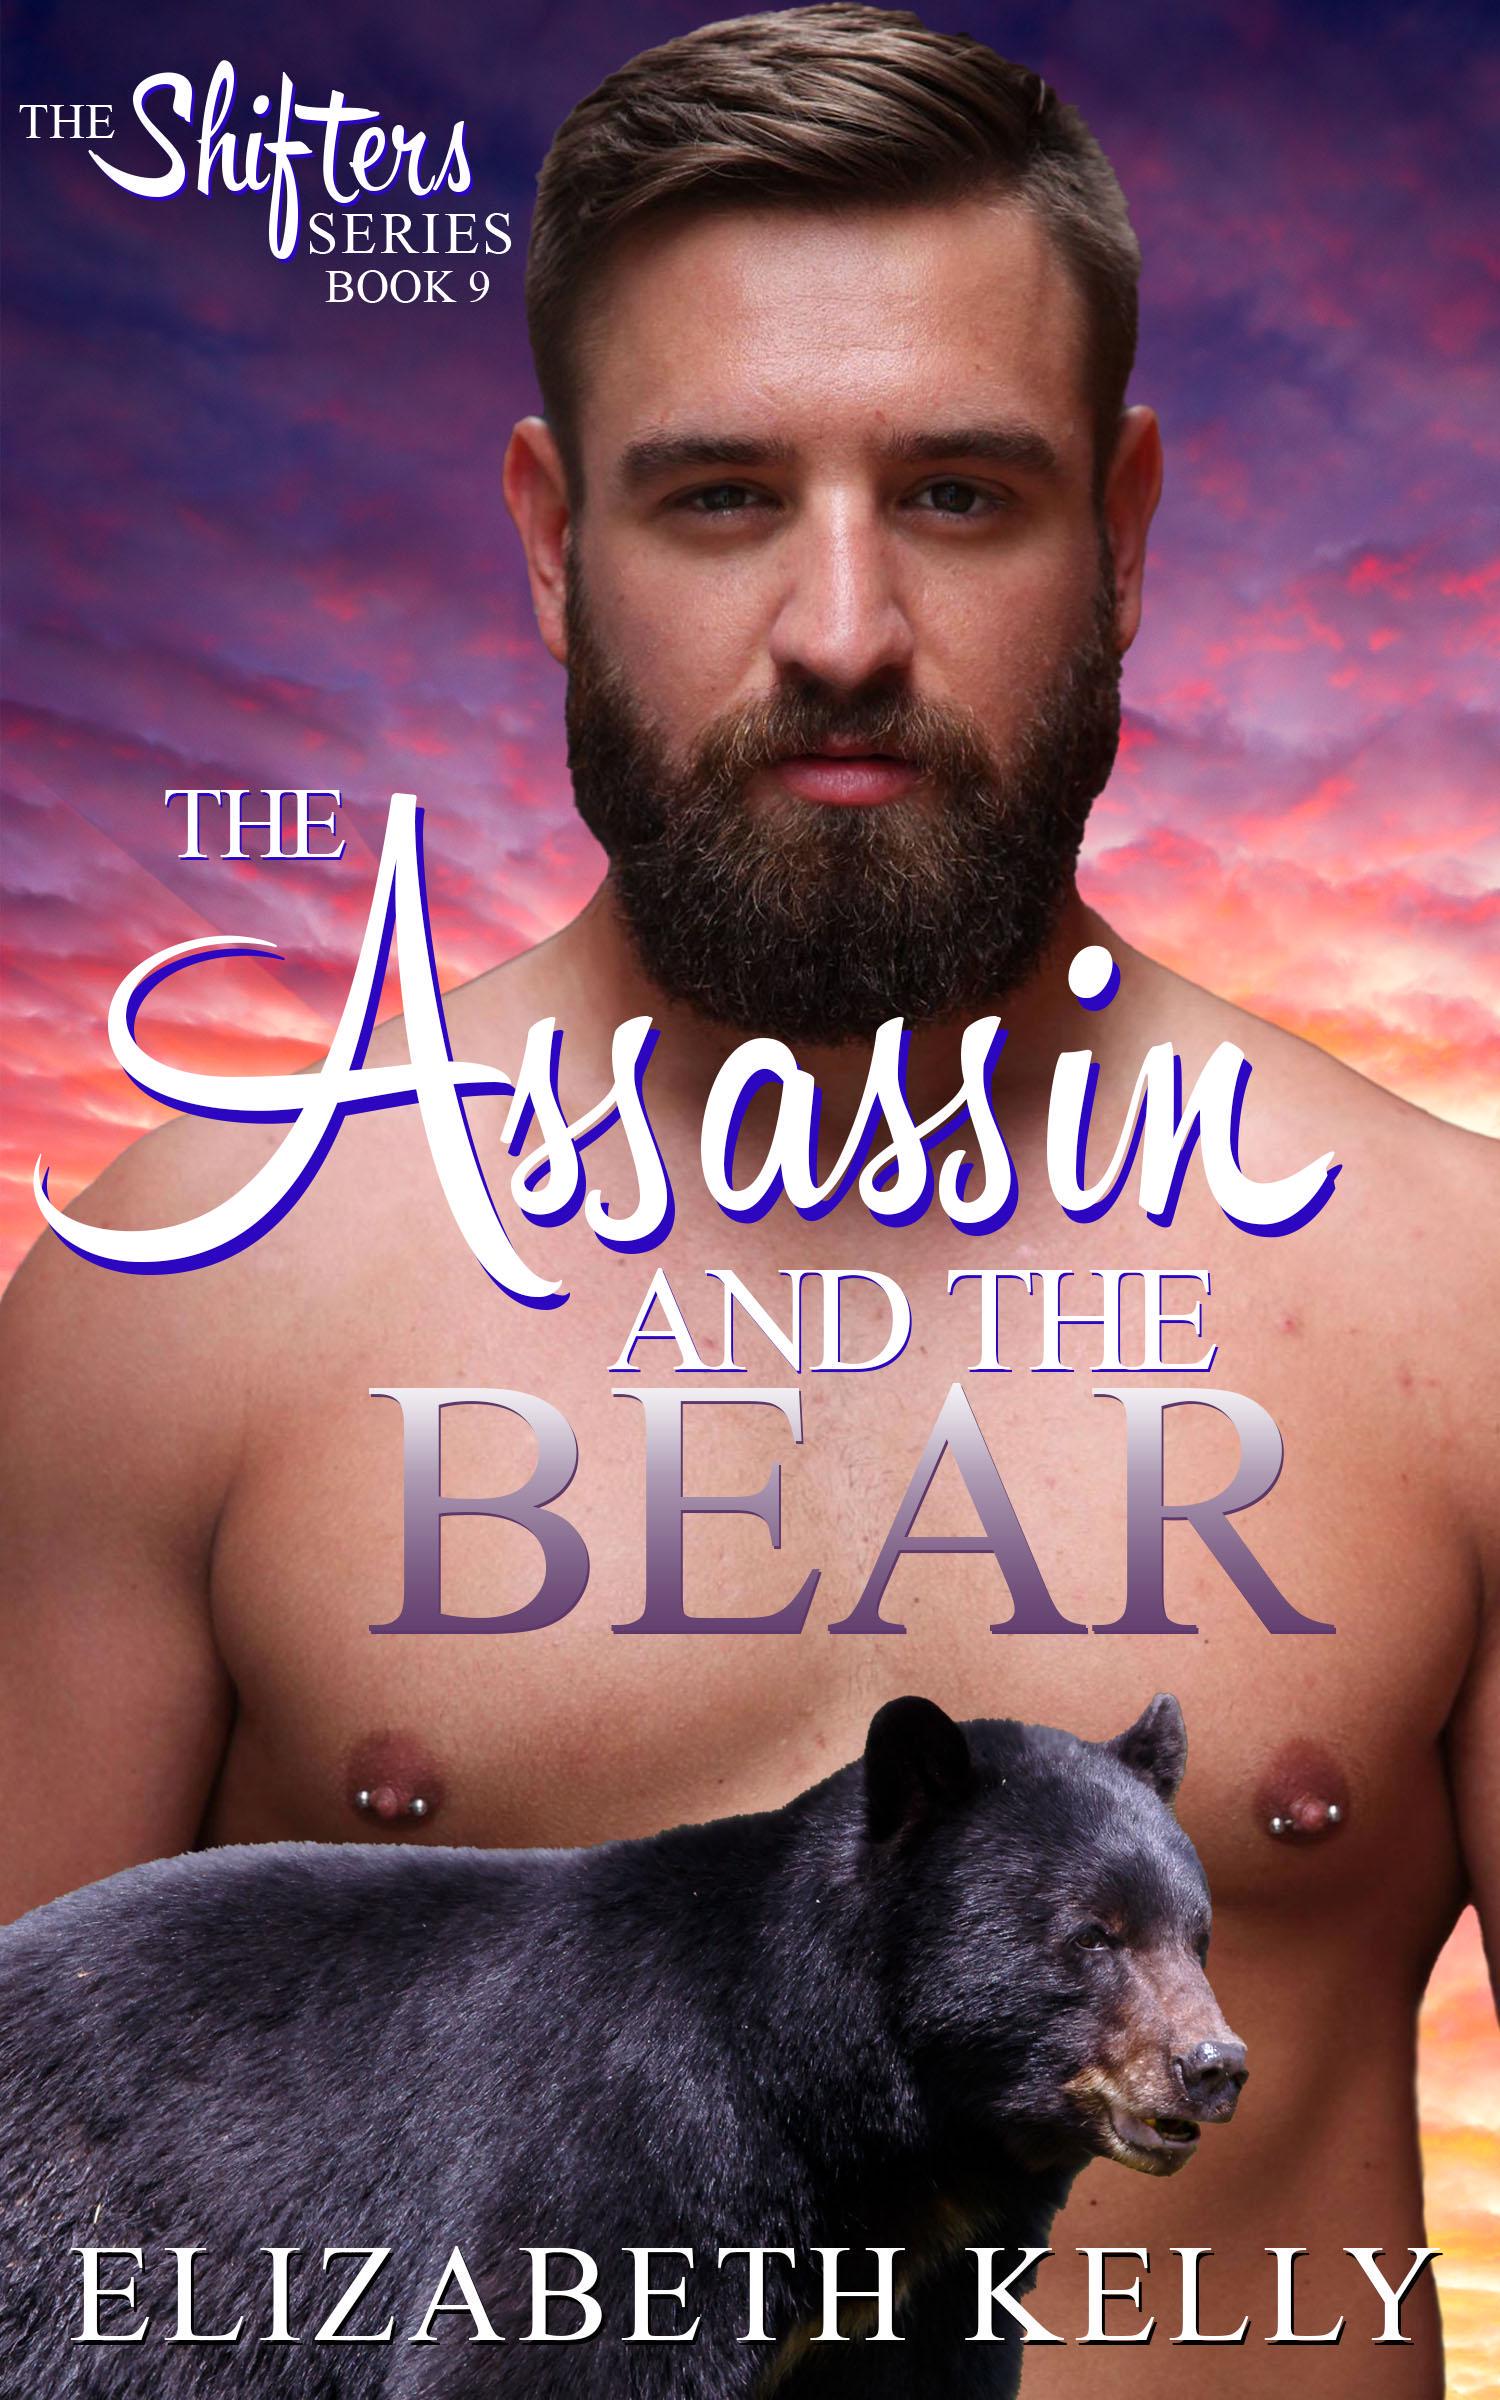 The Assassin and the Bear by Elizabeth Kelly PDF Download Video Library